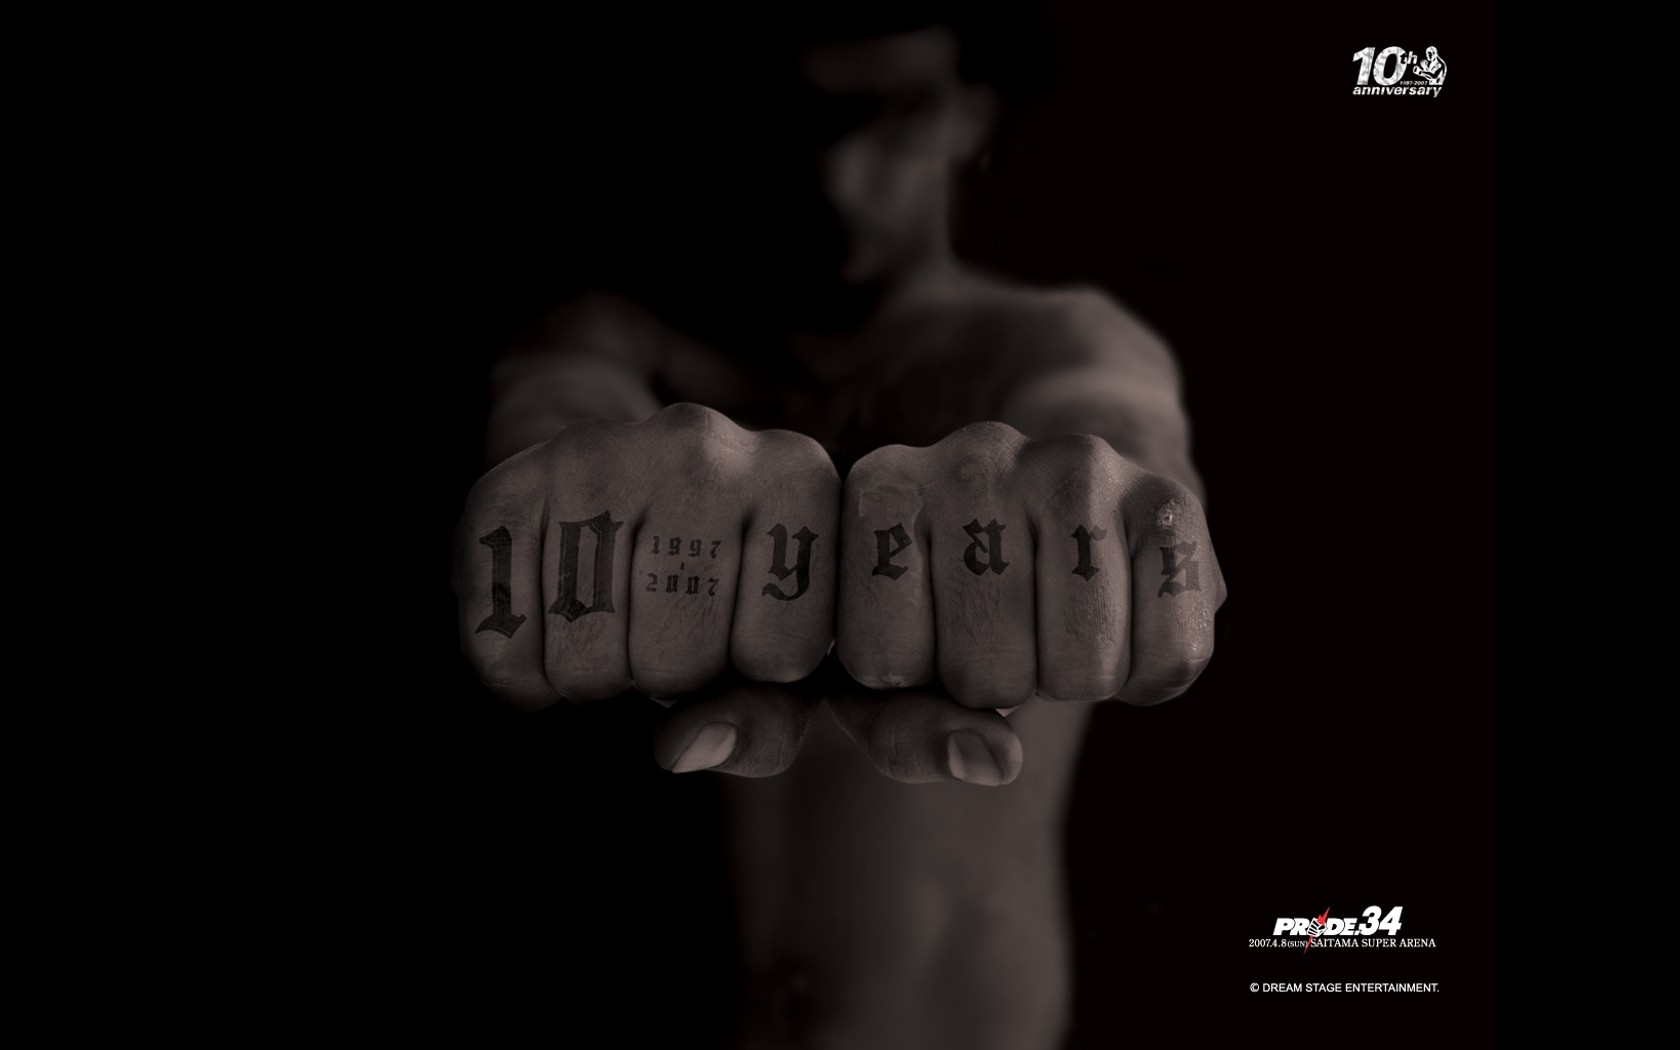 Free download Download Mma Fighter Wallpaper 46 Wallpaper For your screen [1680x1050] for your Desktop, Mobile & Tablet. Explore Wallpaper Mma Ufc. Mma Ufc Wallpaper, Wallpaper Mma Ufc, Mma Ufc Wallpaper